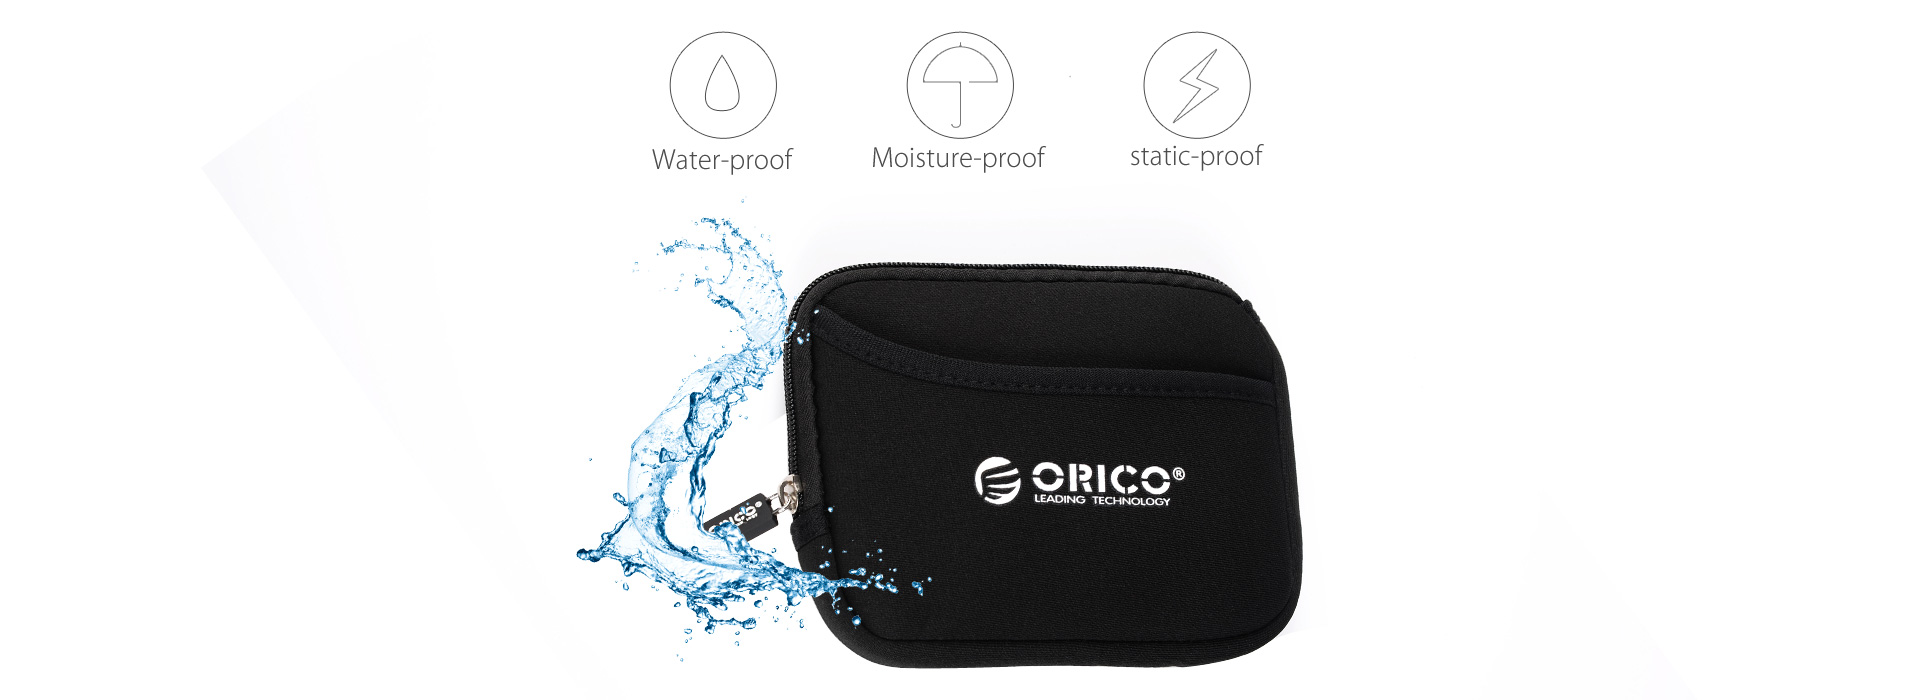 Water-proof, moisture-proof, static-proof Hard Drive Protection Bag